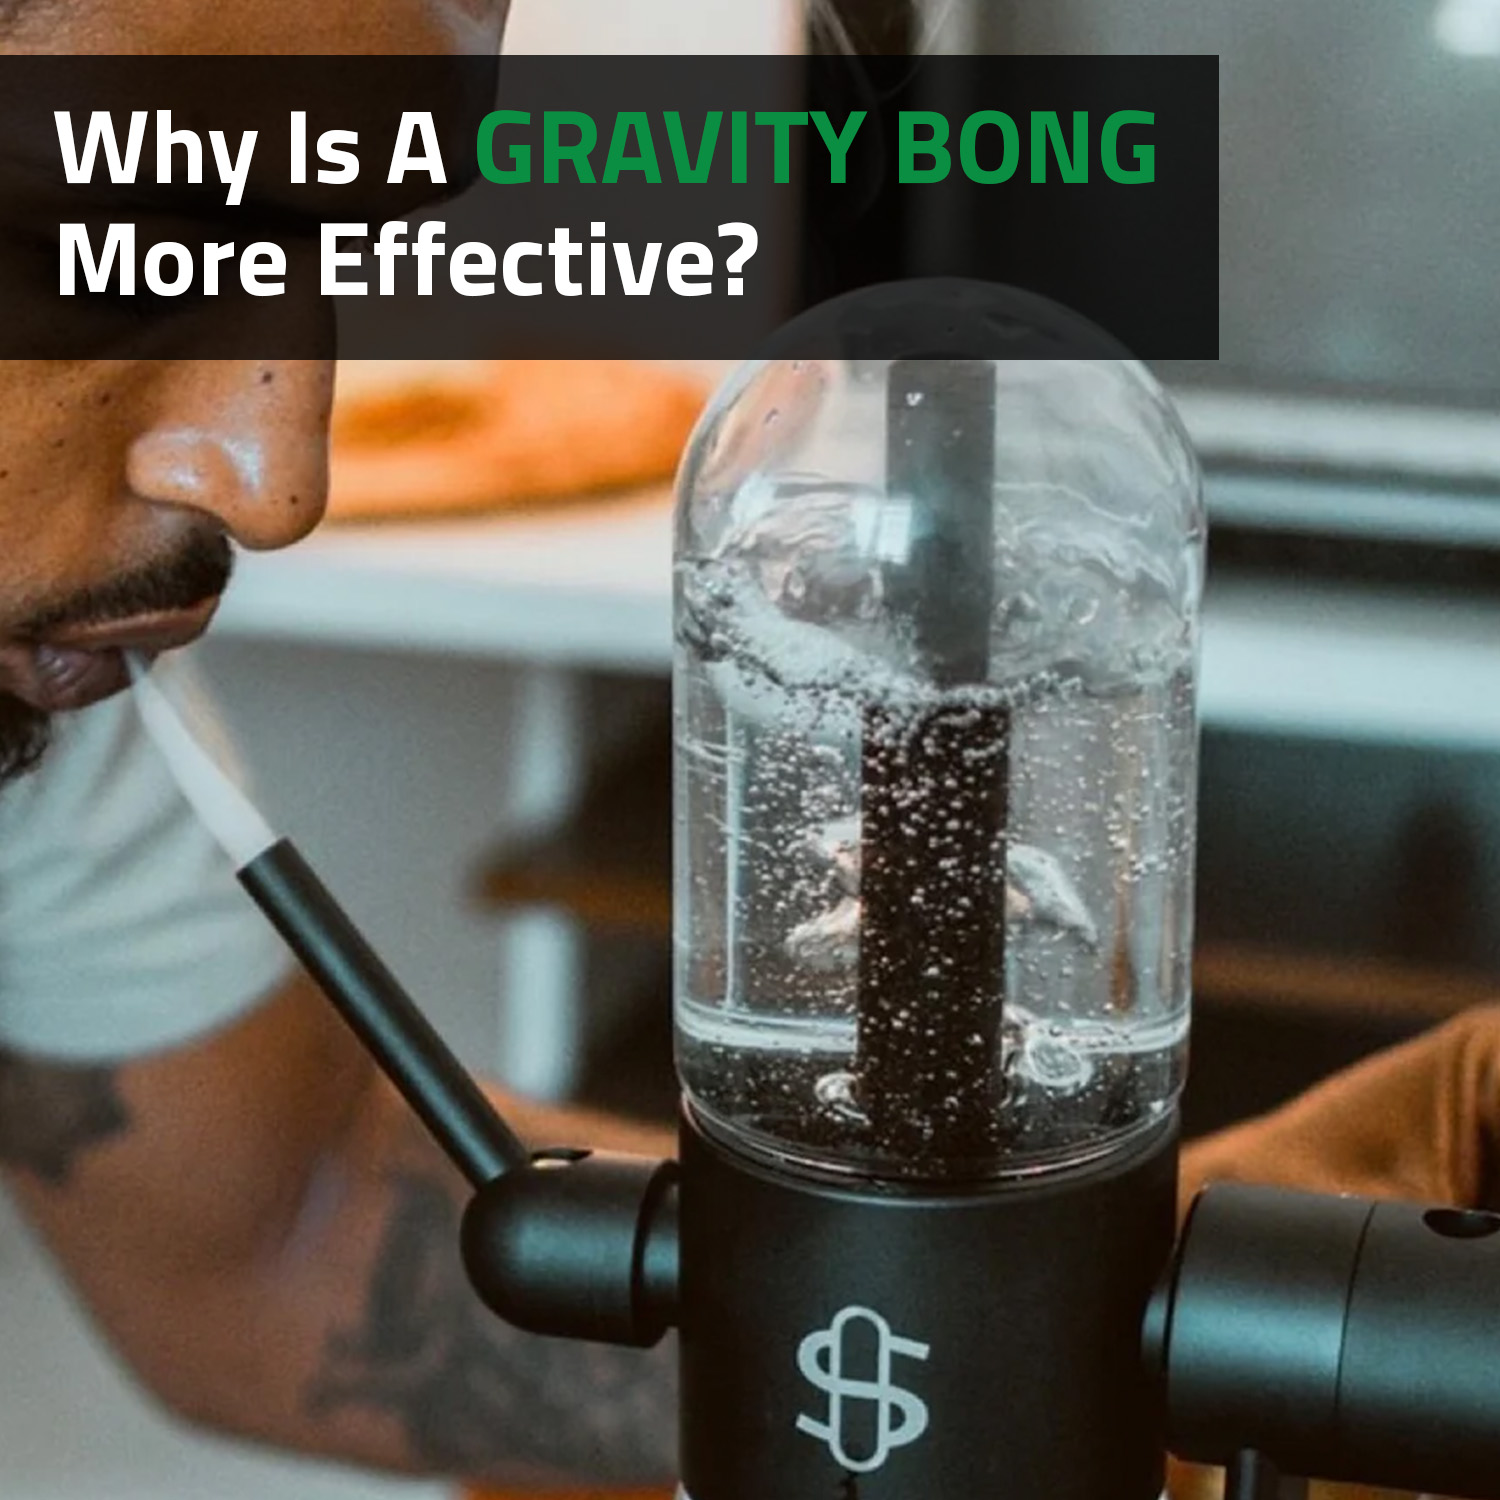 Why Is A Gravity Bong More Effective?